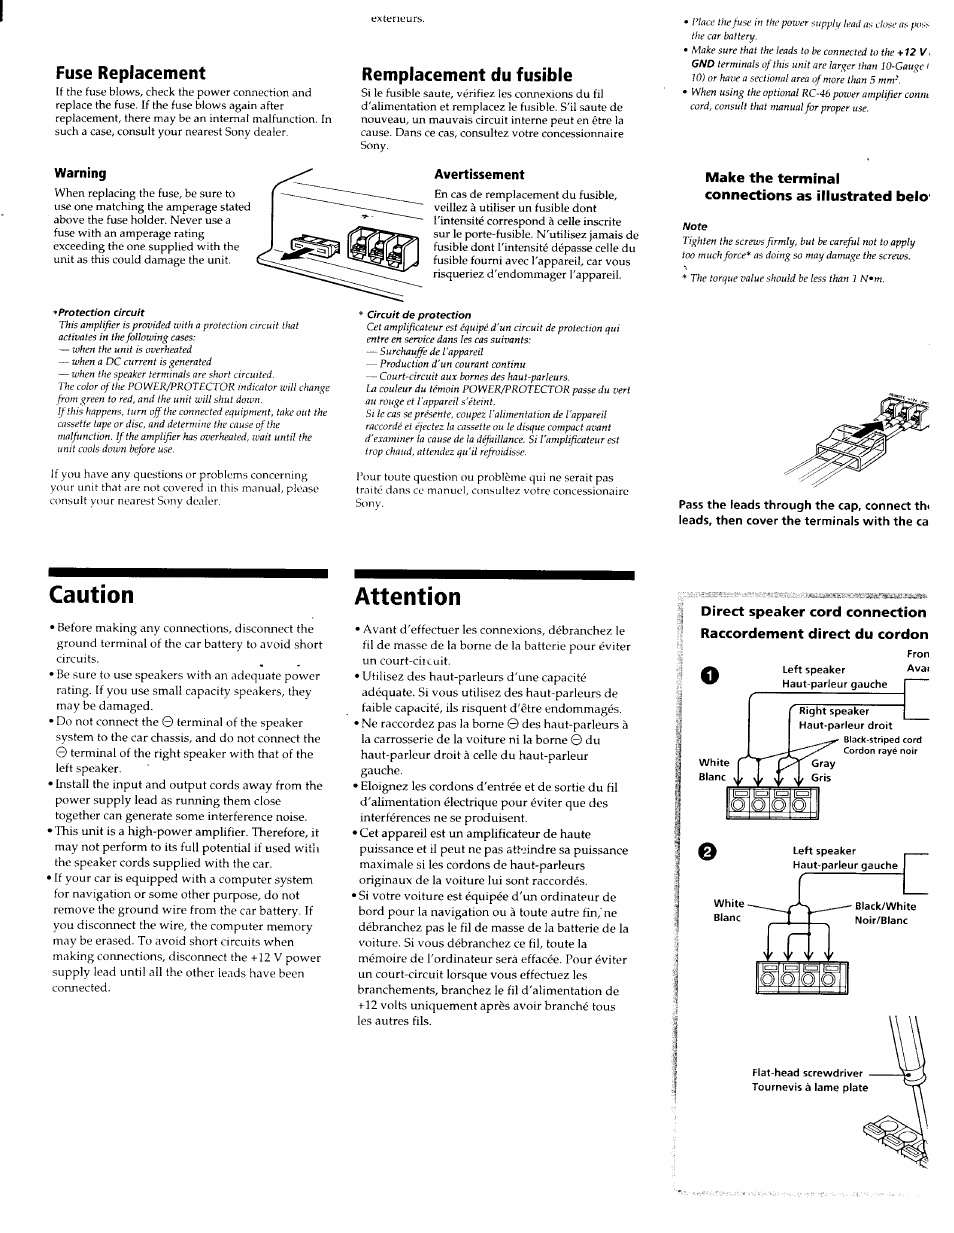 Fuse replacement, Warning, Remplacement du fusible | Avertissement, Make the terminal connections as illustrated belo, Caution, Attention, Caution attention | Sony XM-404EQX Manuel d'utilisation | Page 10 / 12